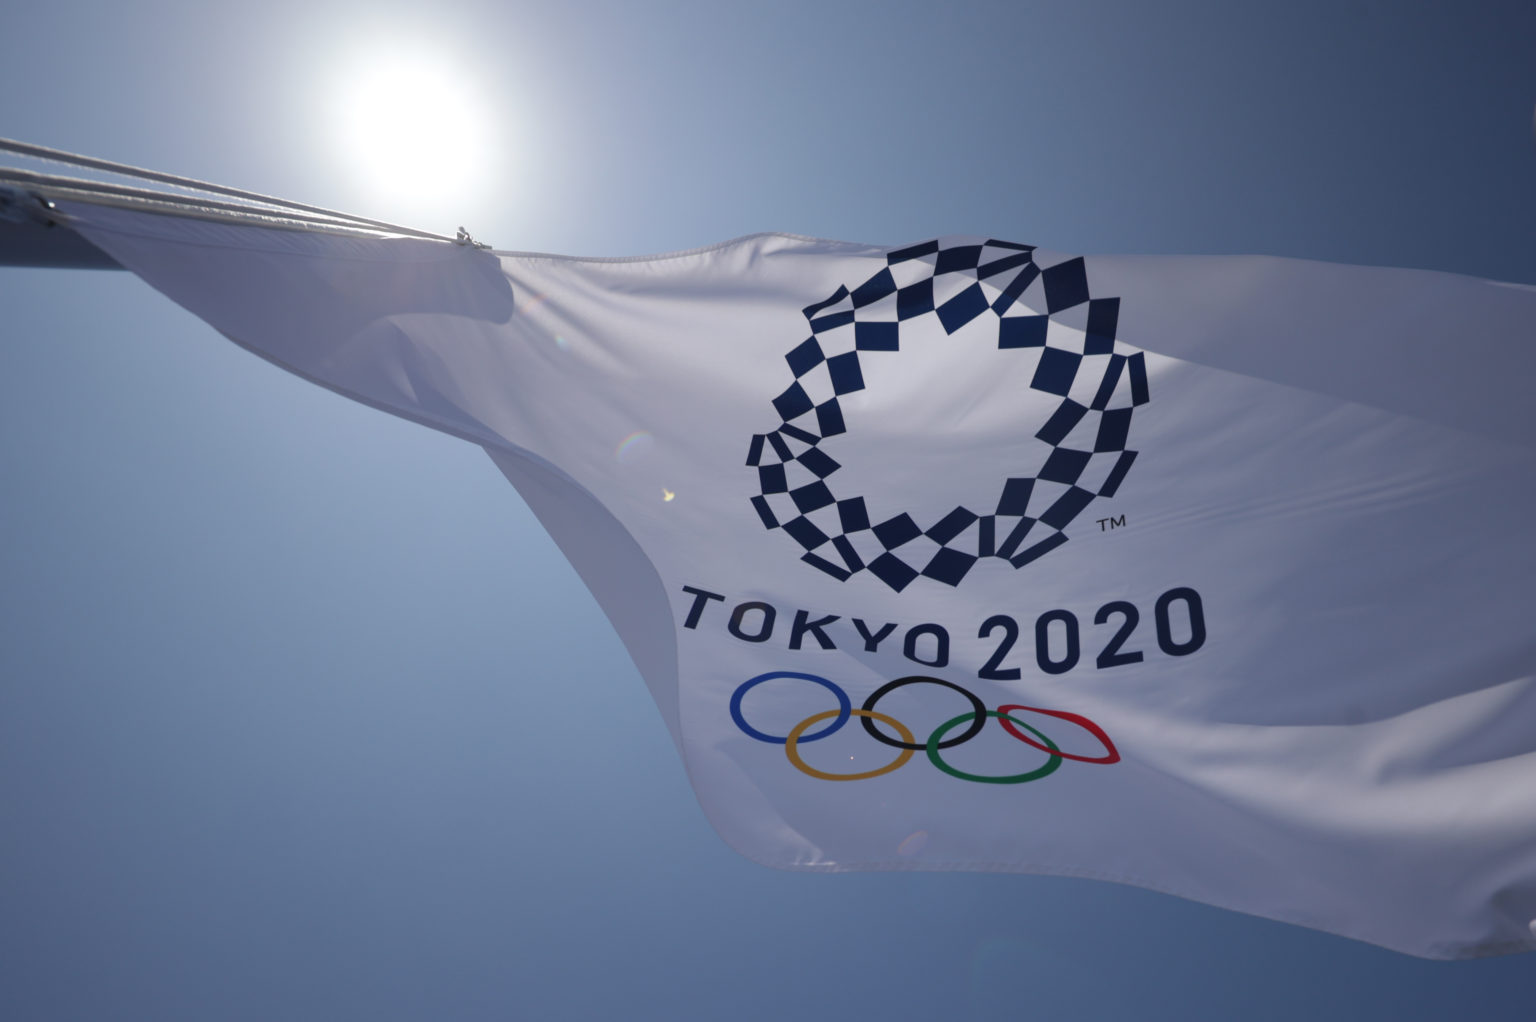 Tokyo spectator ban leaves Olympic athletes perplexed ...